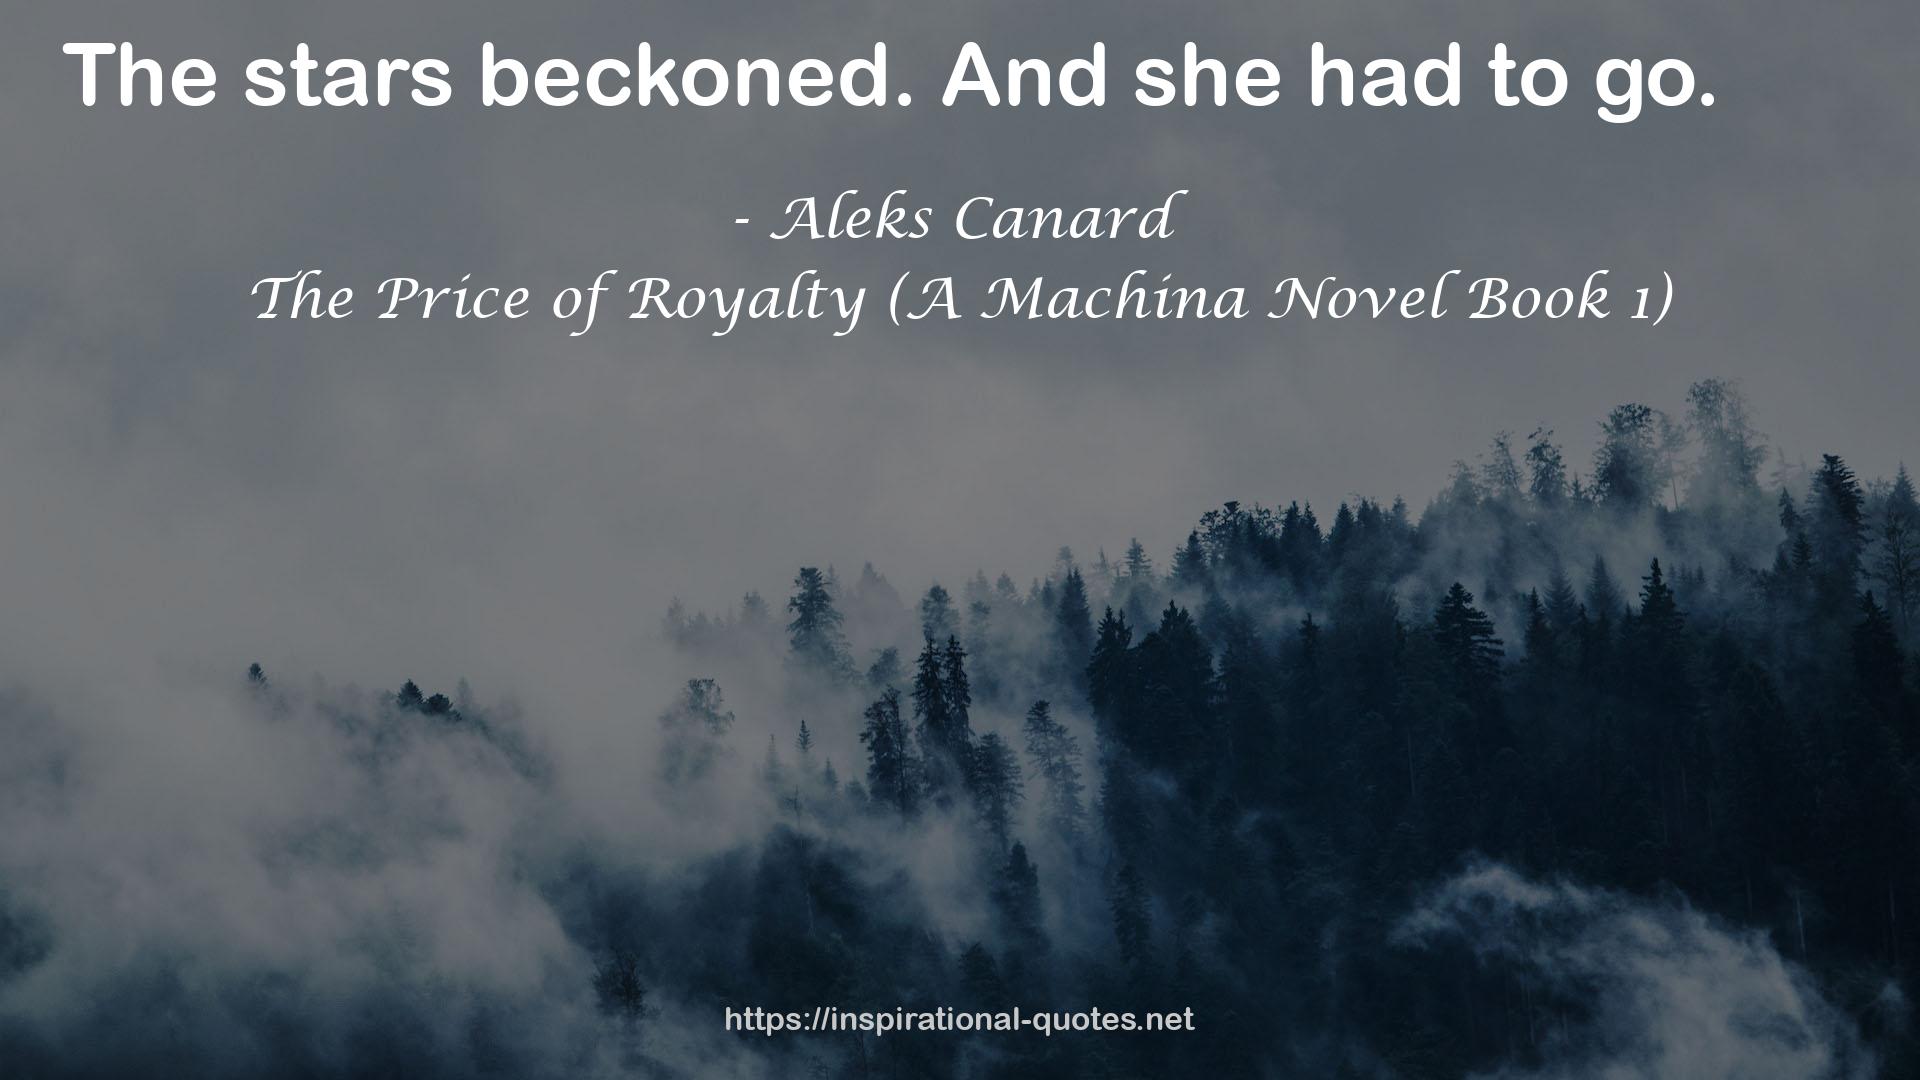 The Price of Royalty (A Machina Novel Book 1) QUOTES